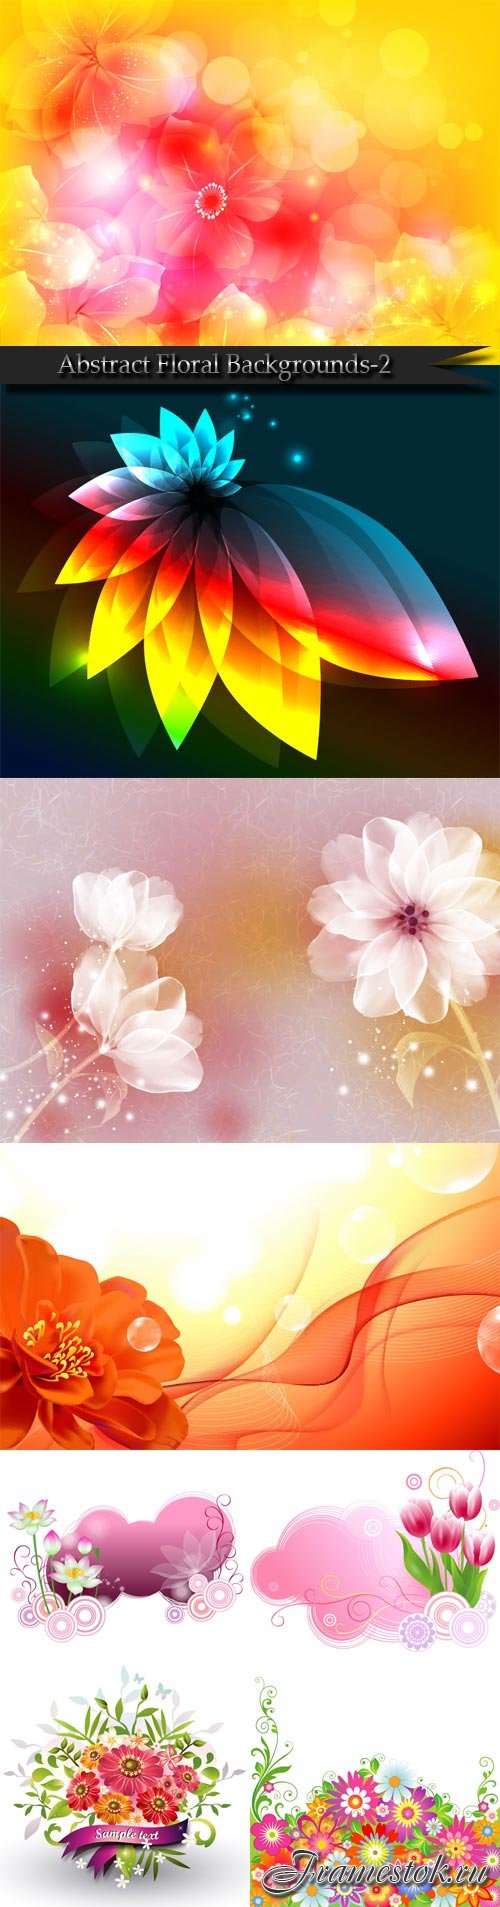 Abstract Floral Backgrounds-2